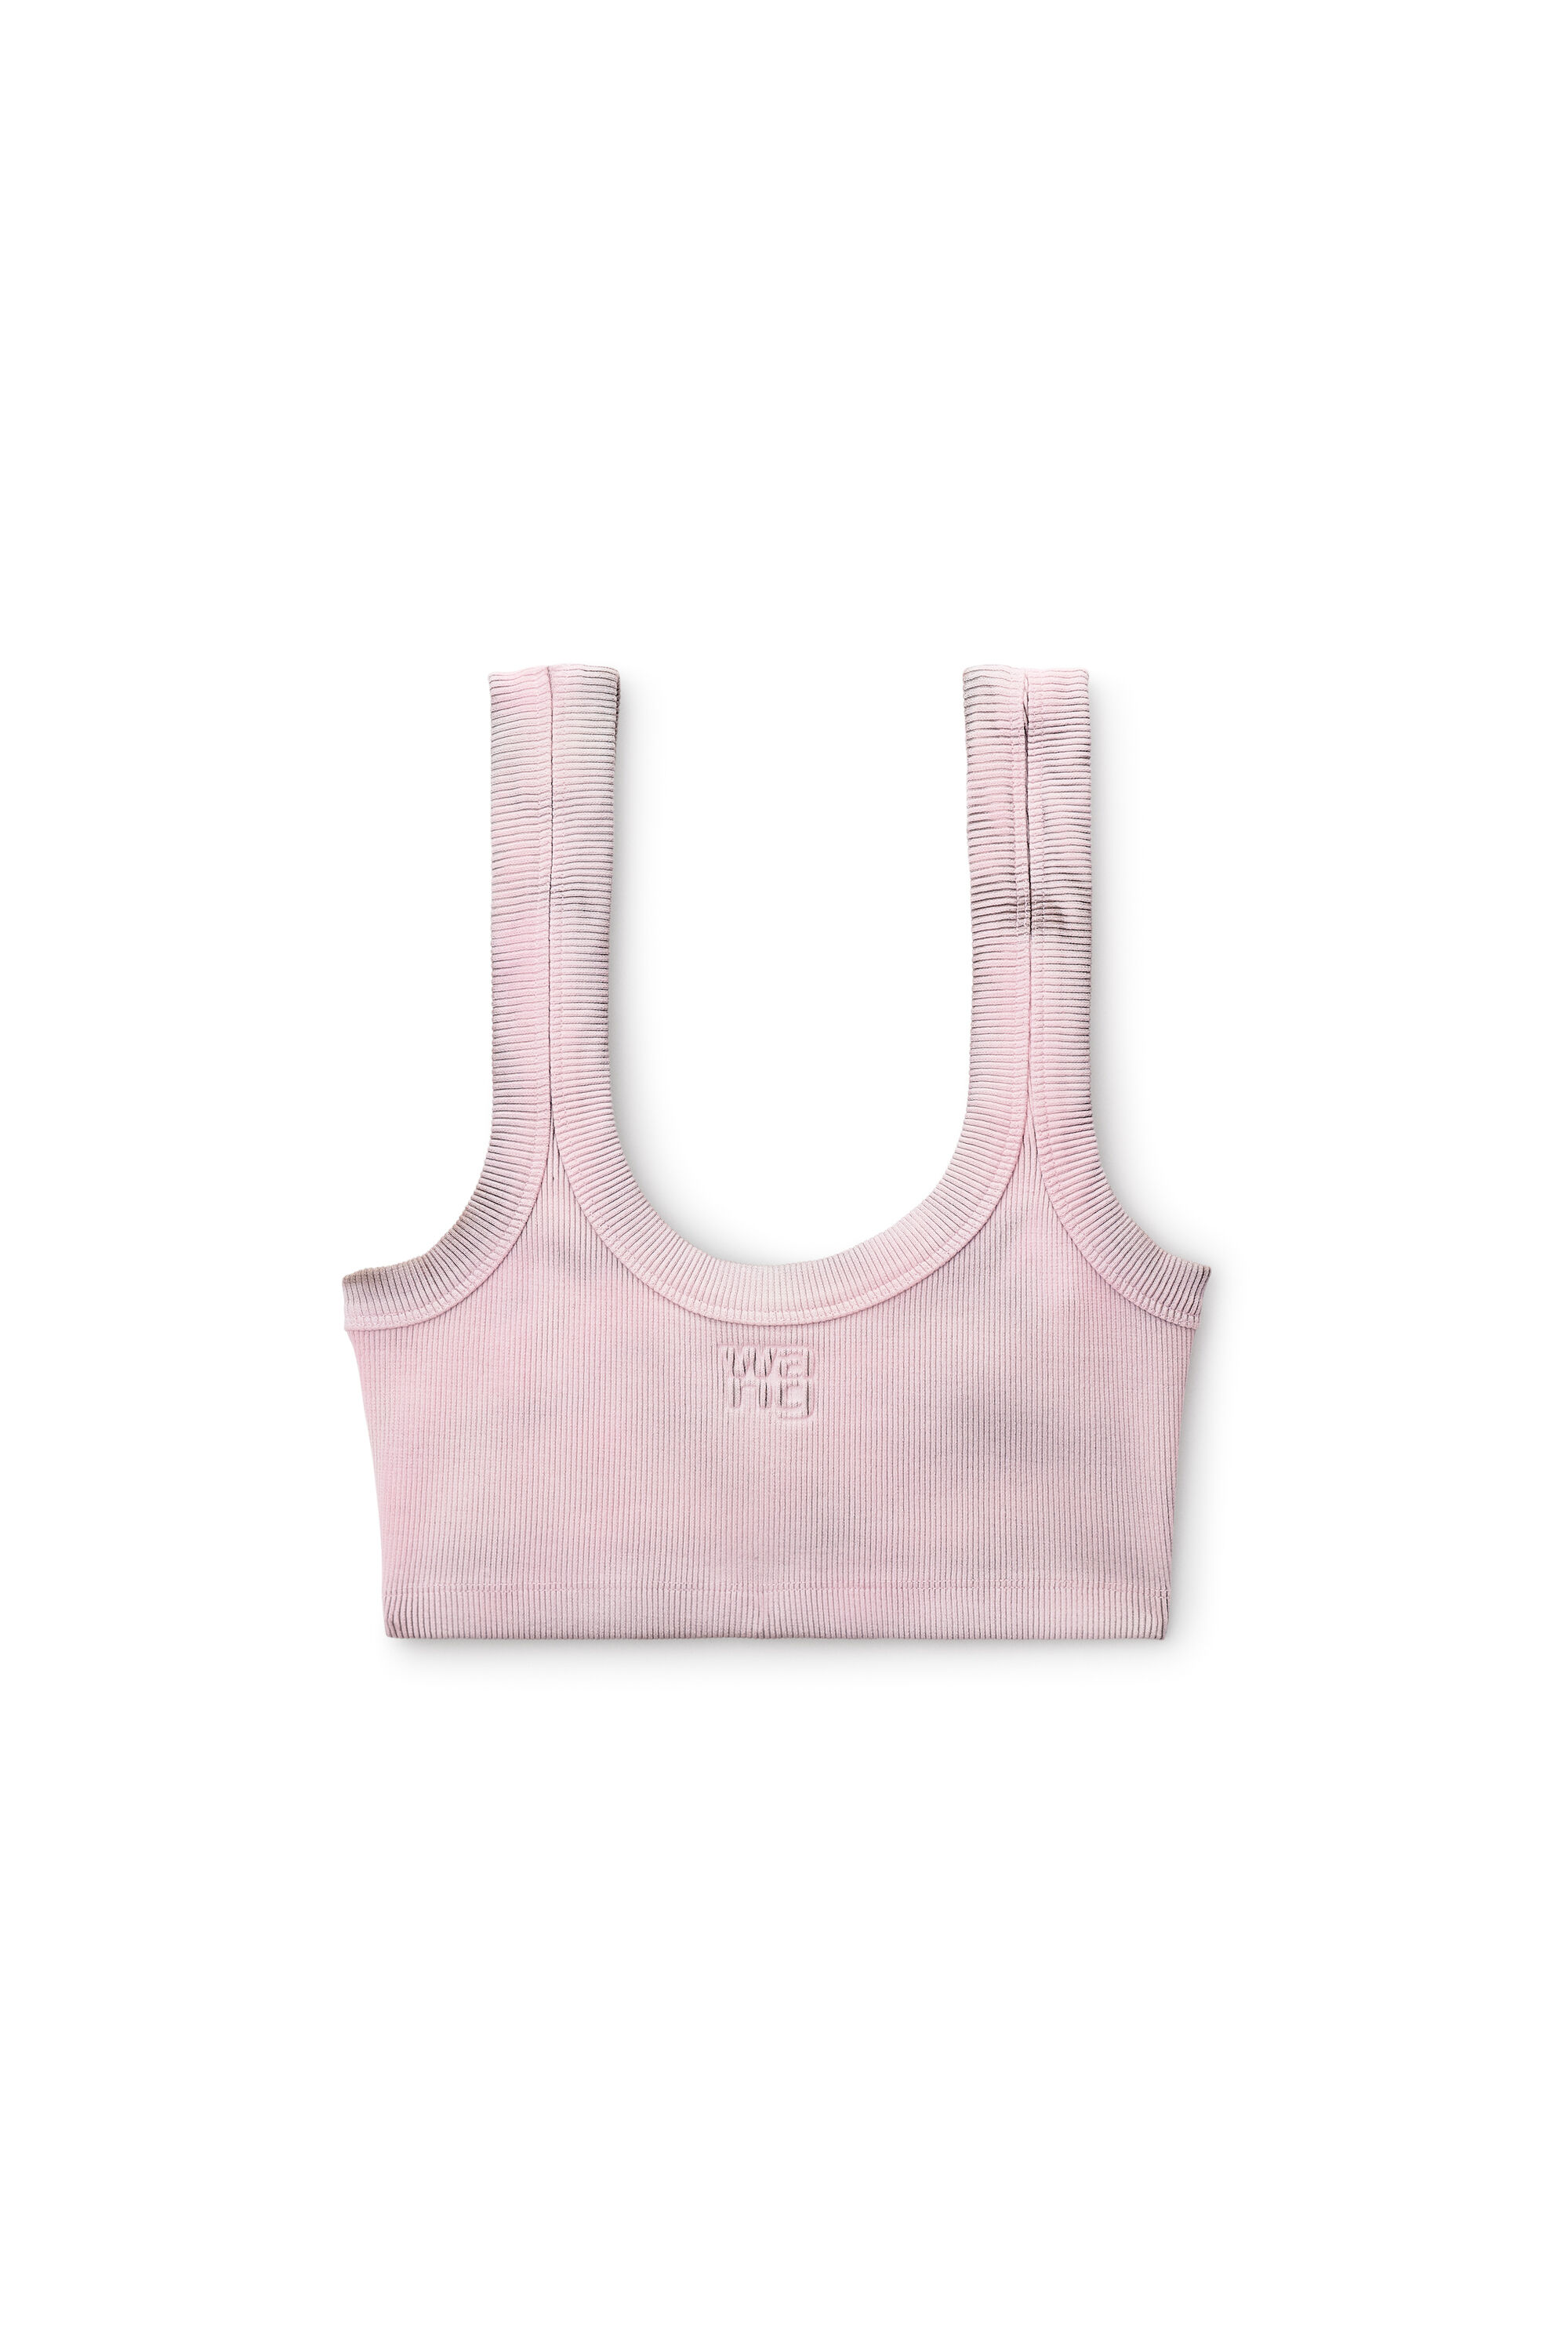 Logo Tank Bra in WASHED PINK LACE | pull over style 